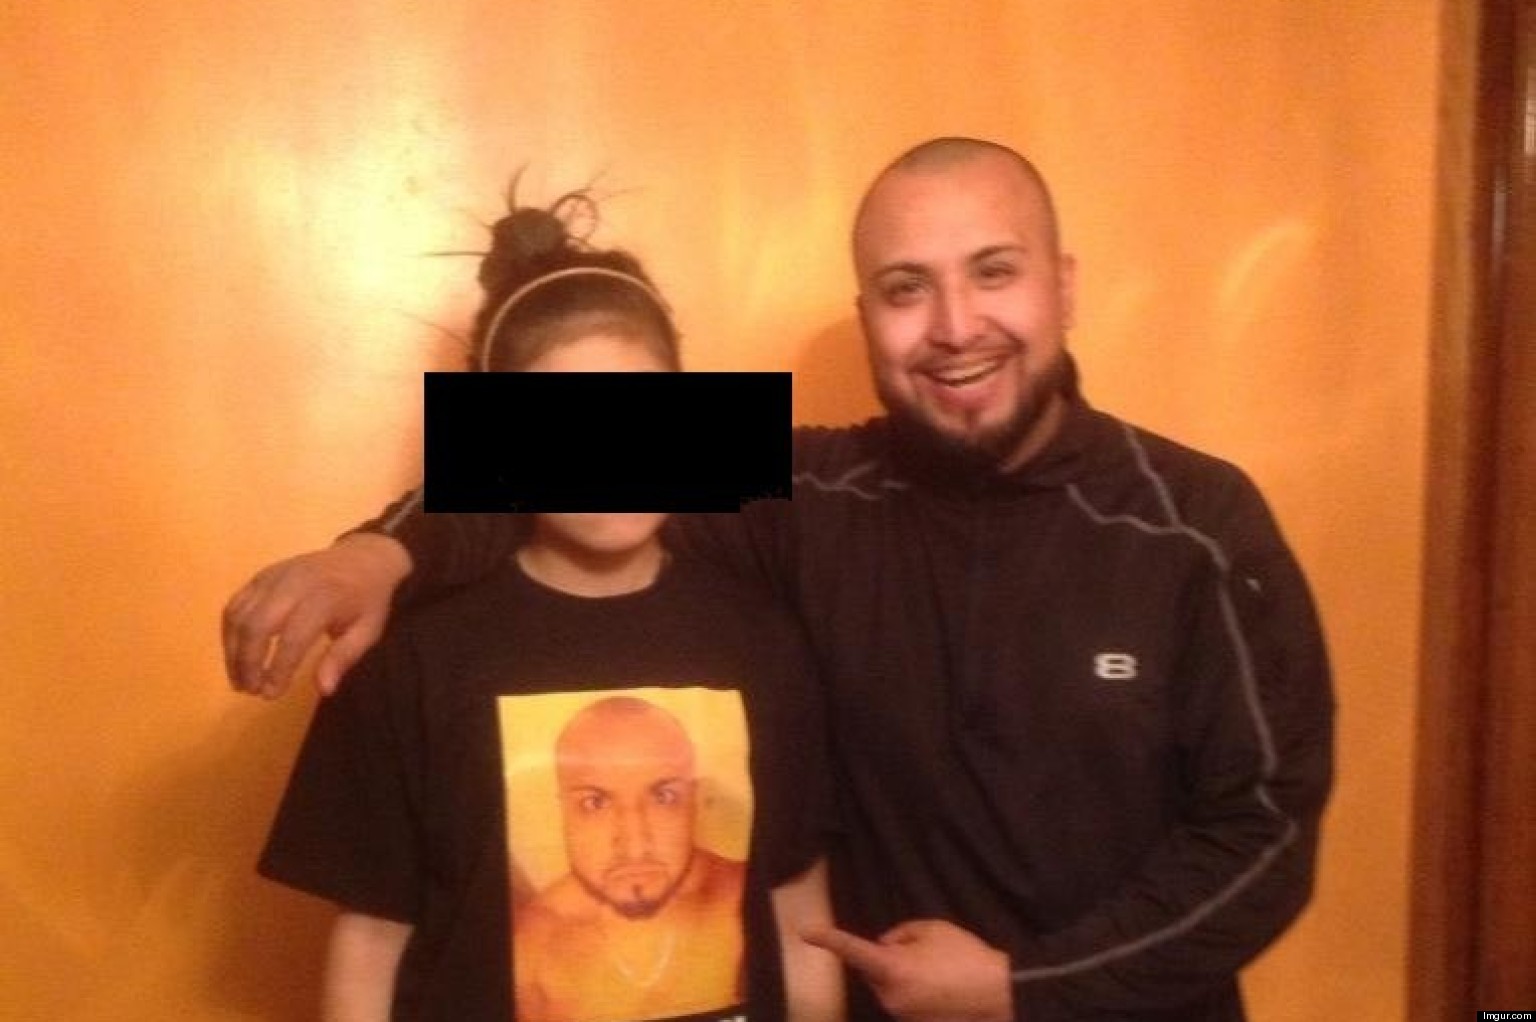 Dad Makes Daughter Wear Embarrassing Shirt To School For Breaking Curfew Photo Huffpost